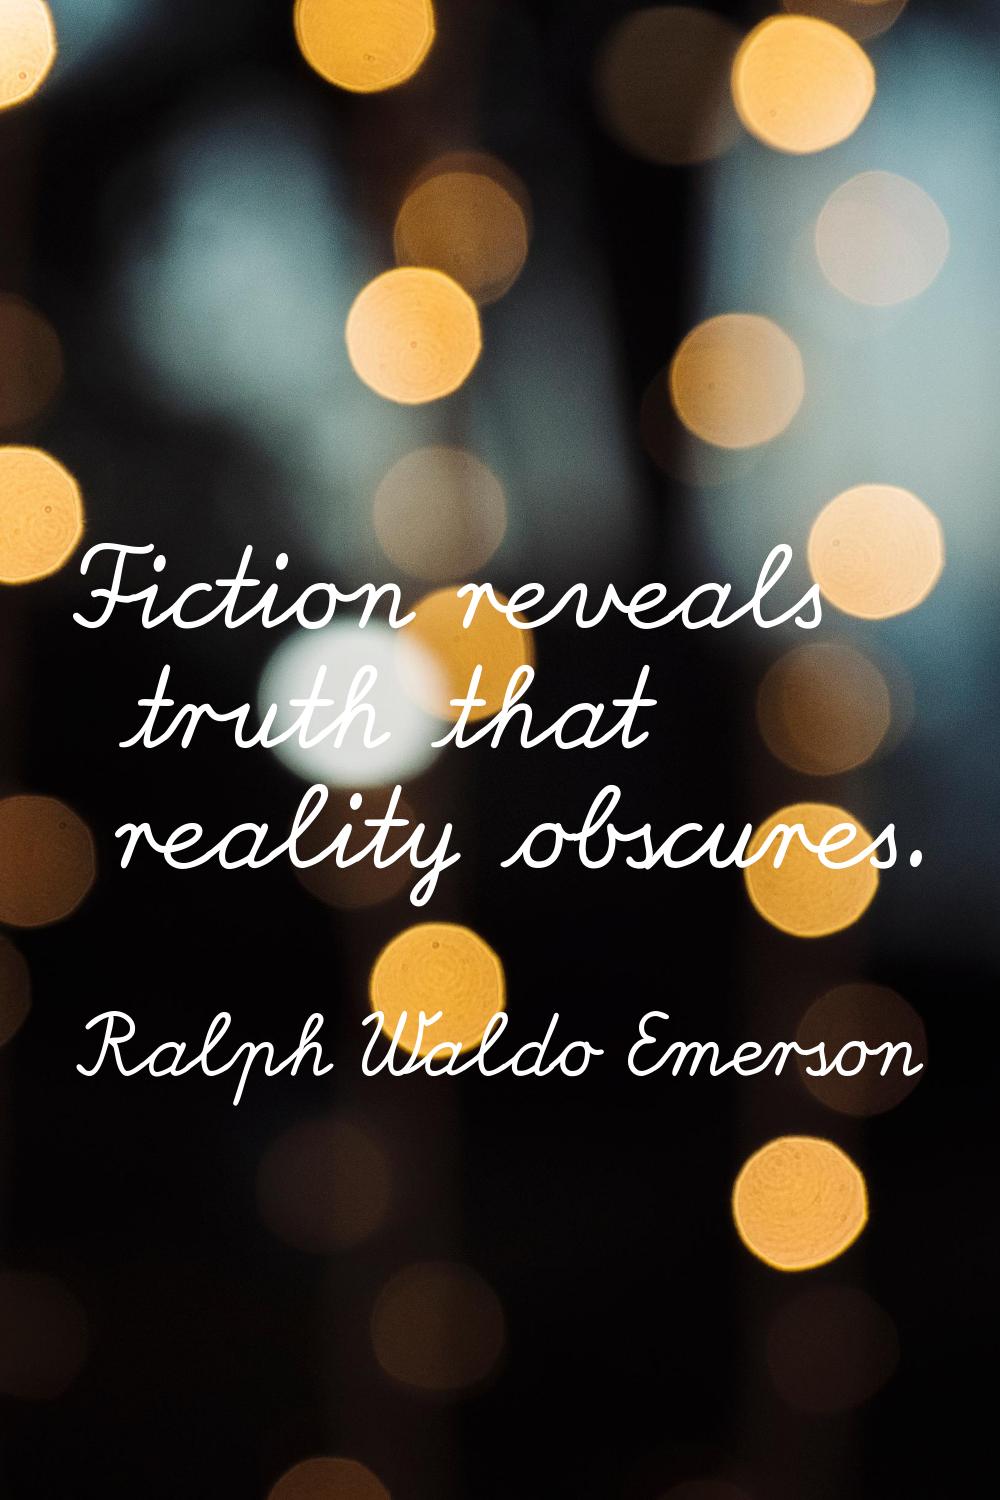 Fiction reveals truth that reality obscures.